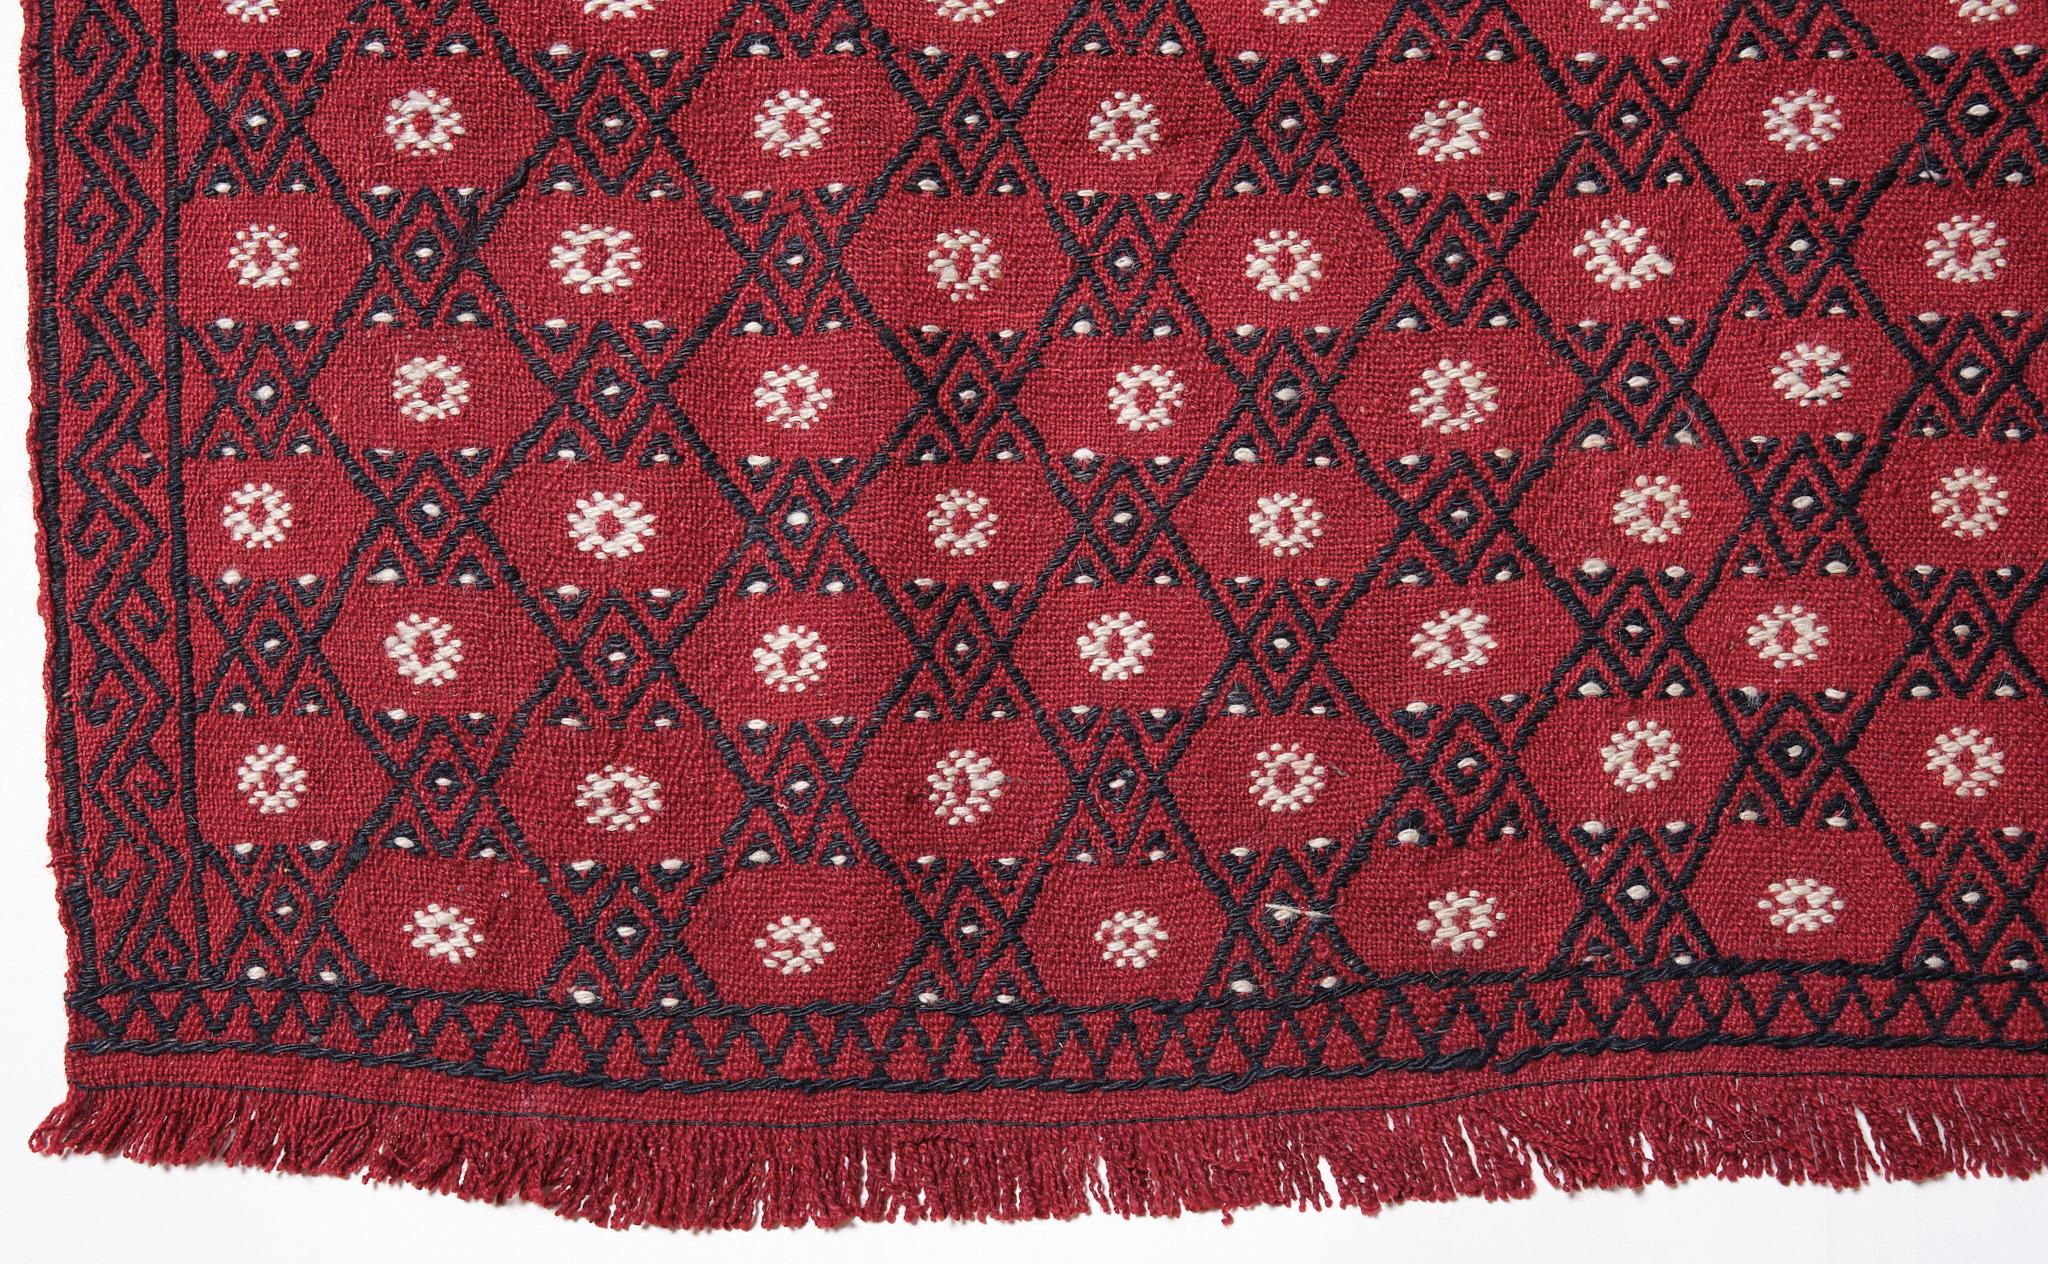 This is an Eastern Anatolian vintage made in two halves of old Cecim ( Cicim or Jijim) Kilim from the Gaziantep region with a rare and beautiful color composition.

This town lies in south-eastern Turkey, close to the Syrian border and the Euphrates